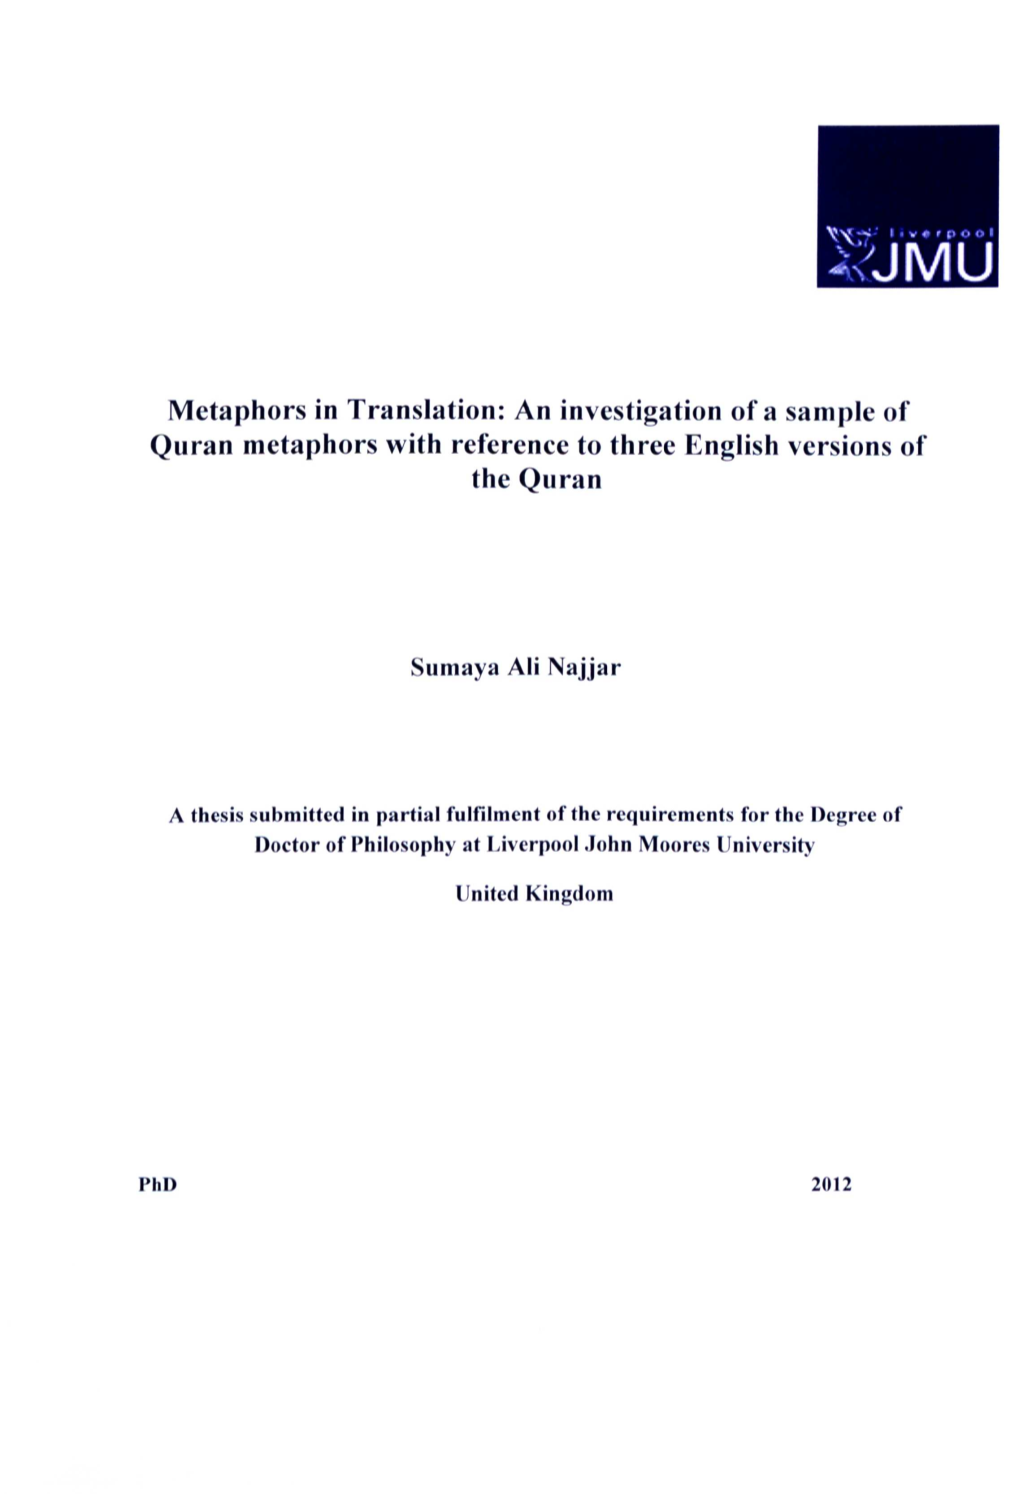 Metaphors in Translation: an Investigation of a Sample of Quran Metaphors with Reference to Three English Versions of the Quran